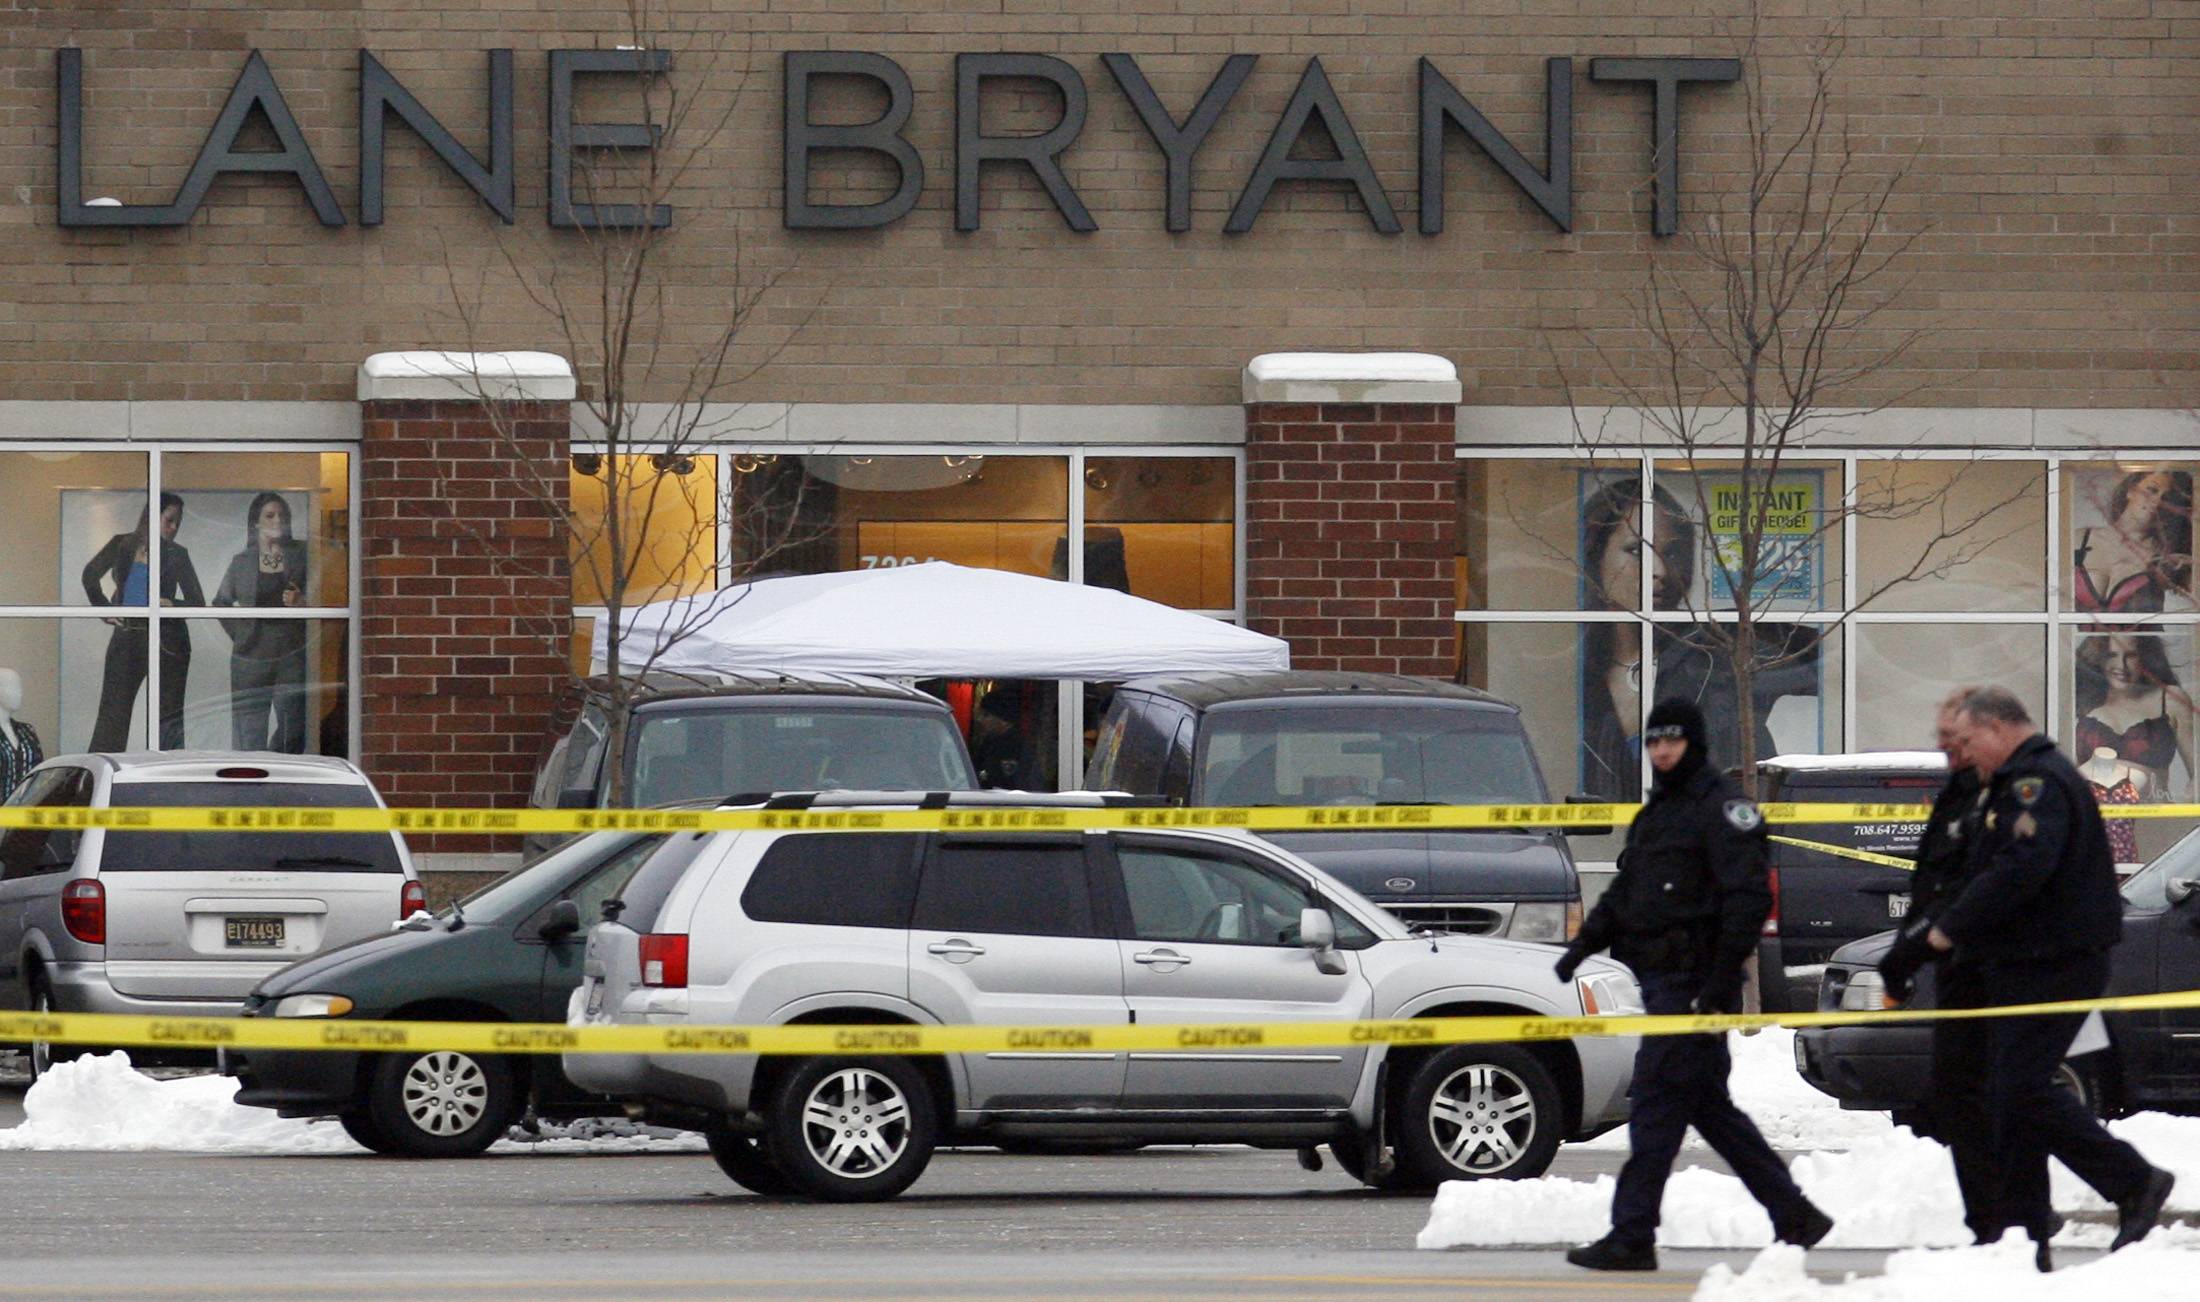 Police walk outside a Lane Bryant store at a shopping center in Tinley Park, investigating the scene in 2008 where five women were killed during a robbery. The case remains unsolved.